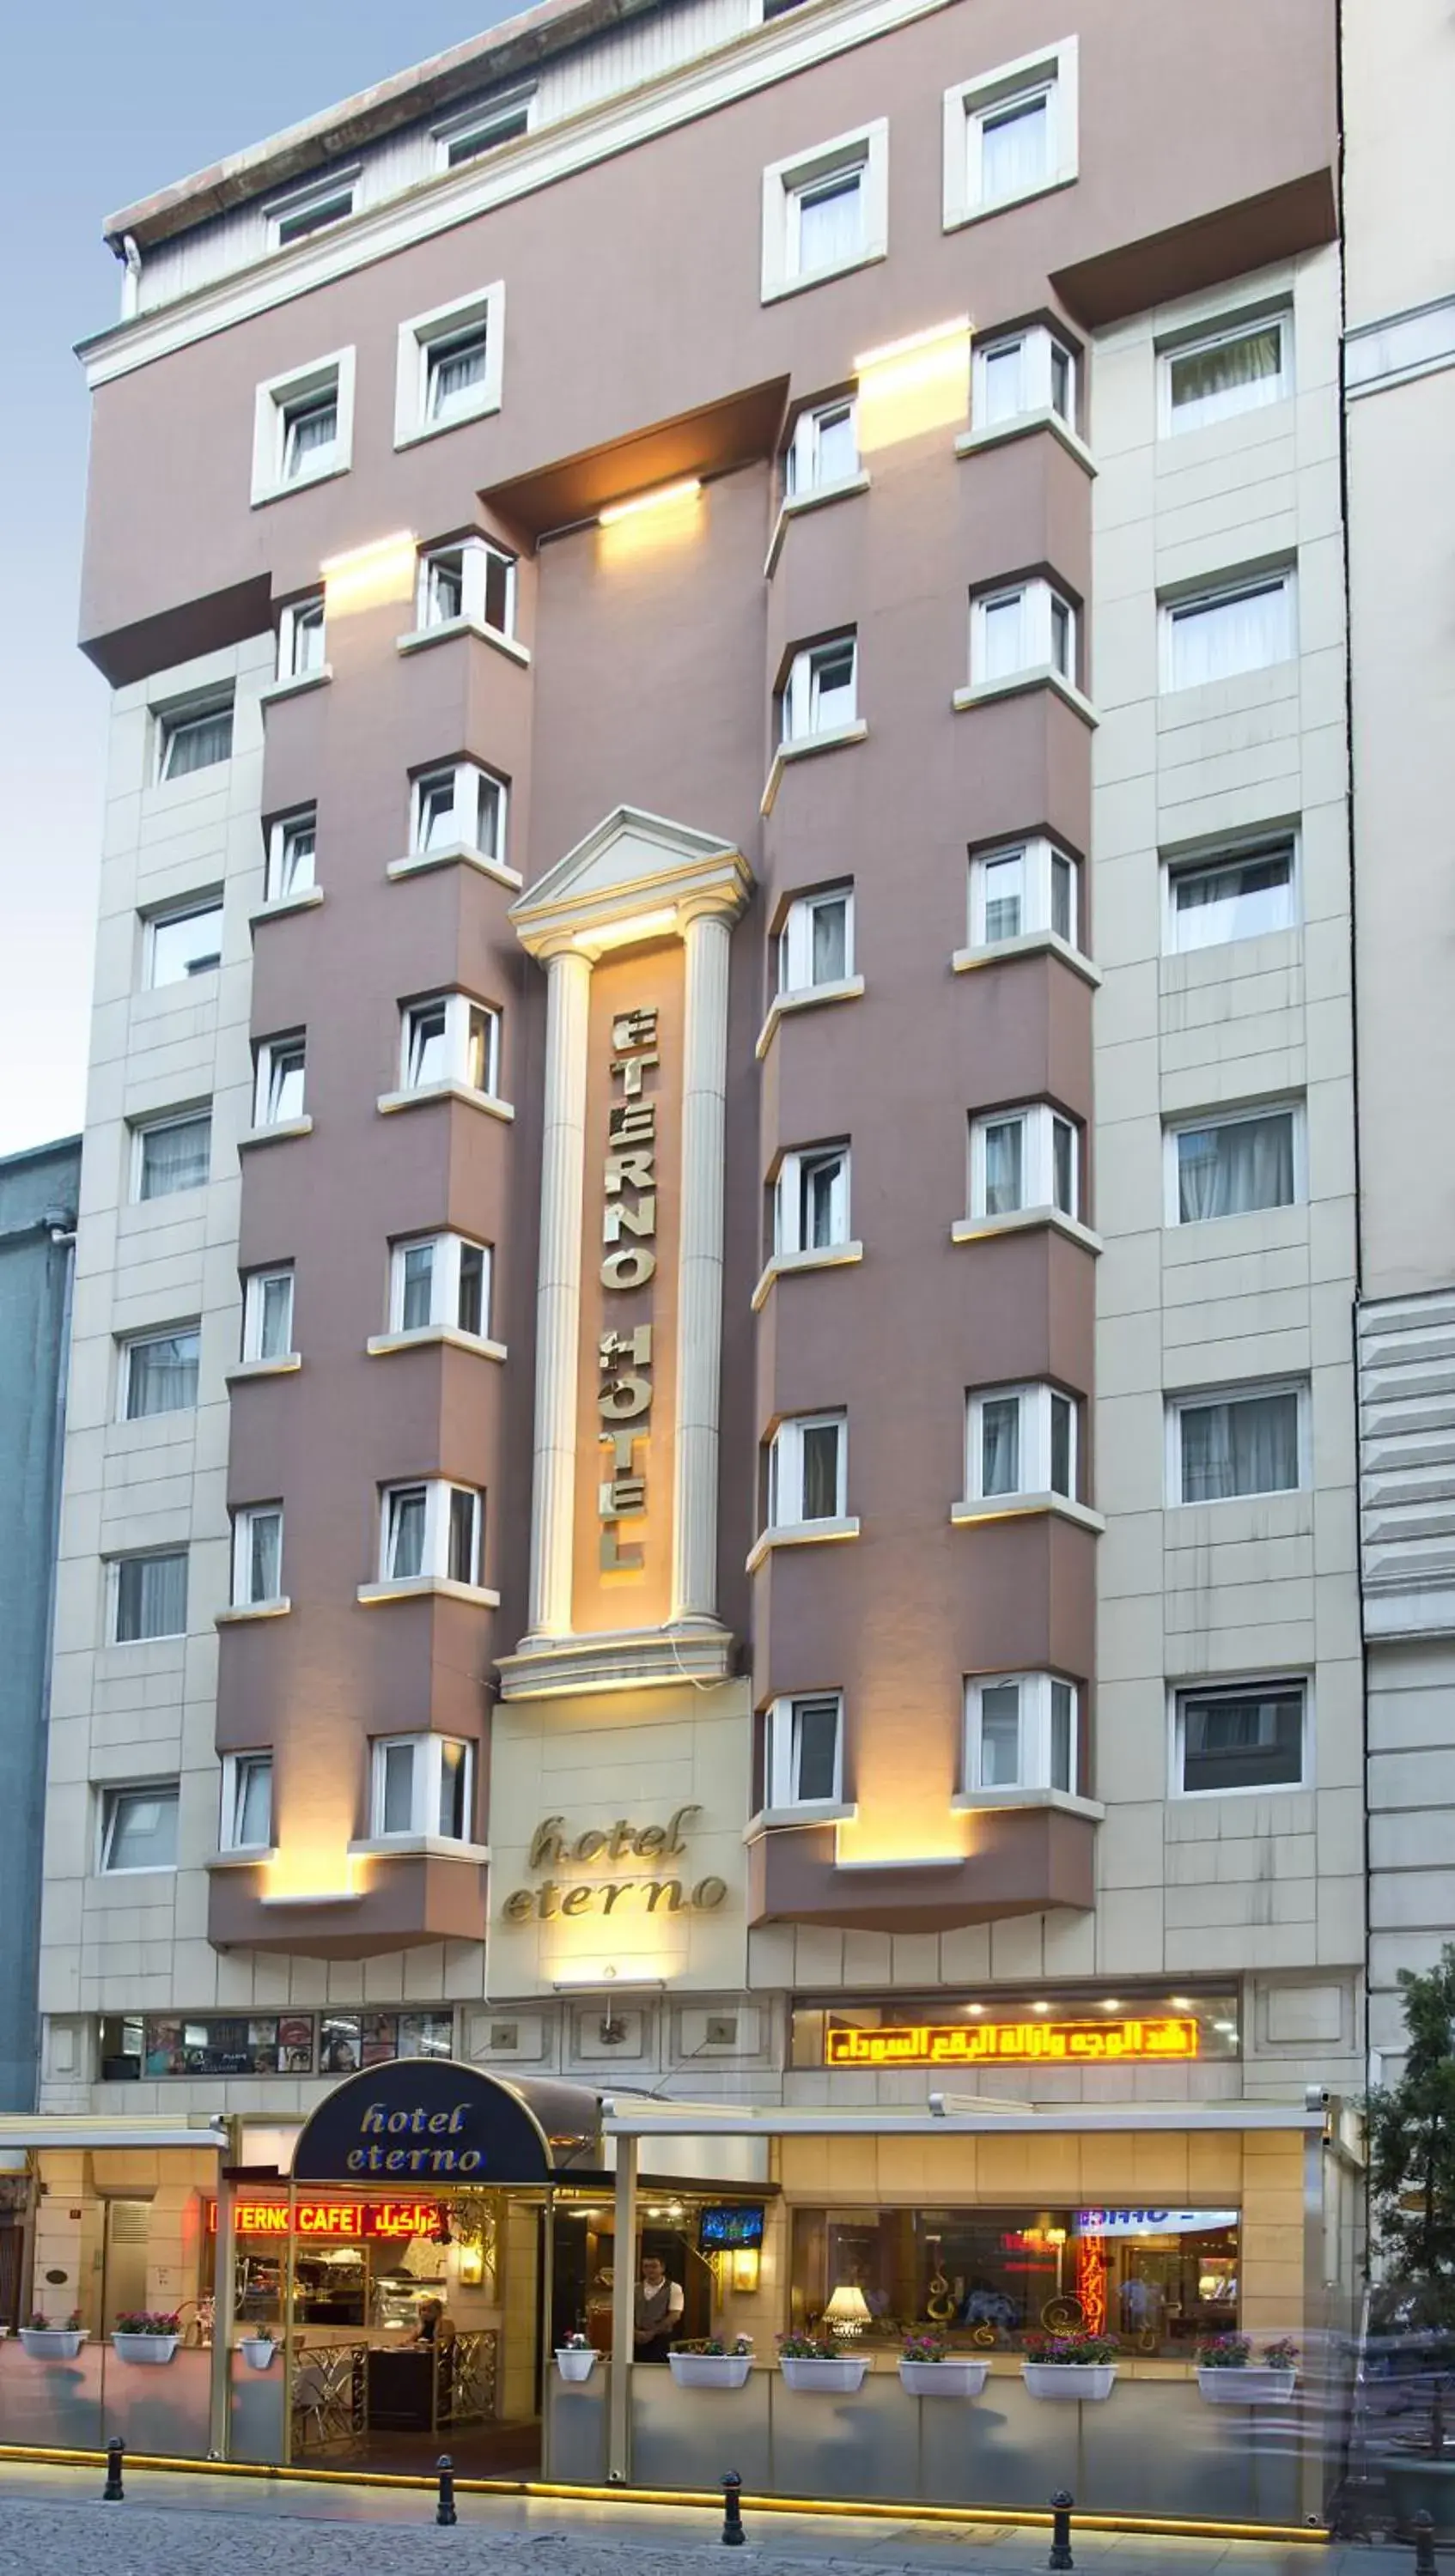 Property Building in Eterno Hotel